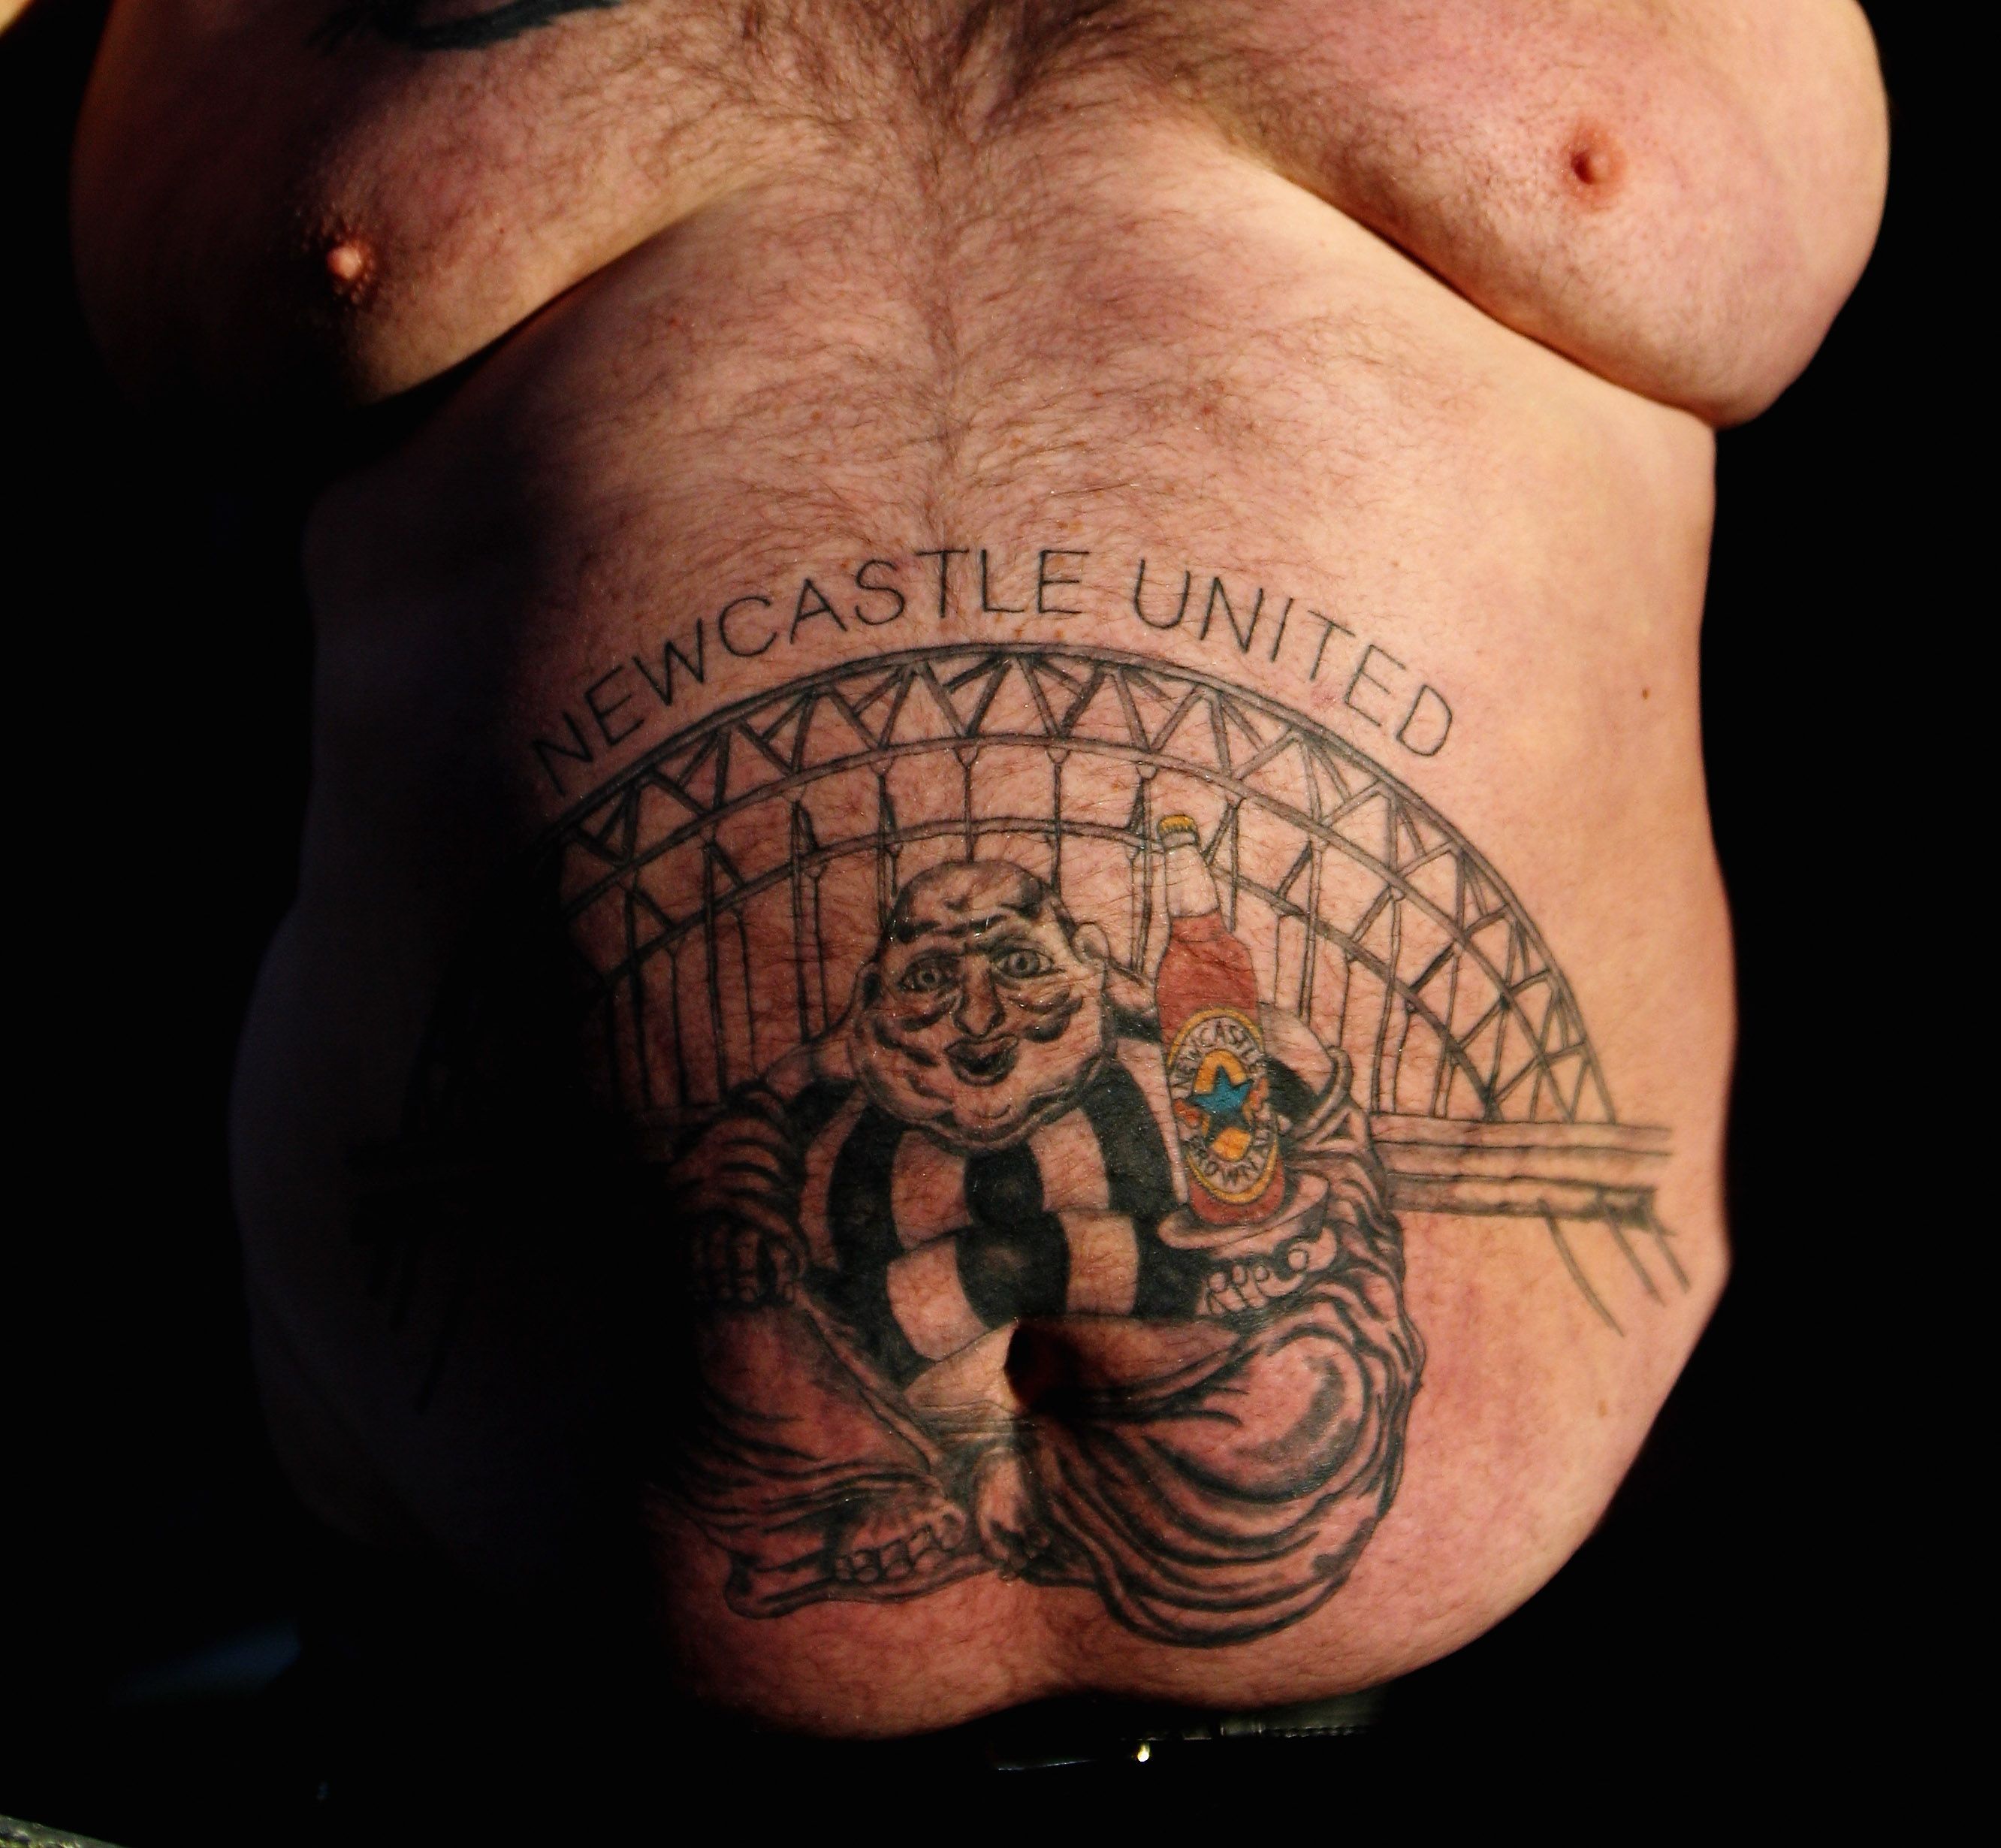 BLACKBURN, ENGLAND - FEBRUARY 12: A Newcastle fan shows his tattoo during the Barclays Premier League match between Blackburn Rovers and Newcastle United at Ewood Park on February 12, 2011 in Blackburn, England. (Photo by Dean Mouhtaropoulos/Getty Images)